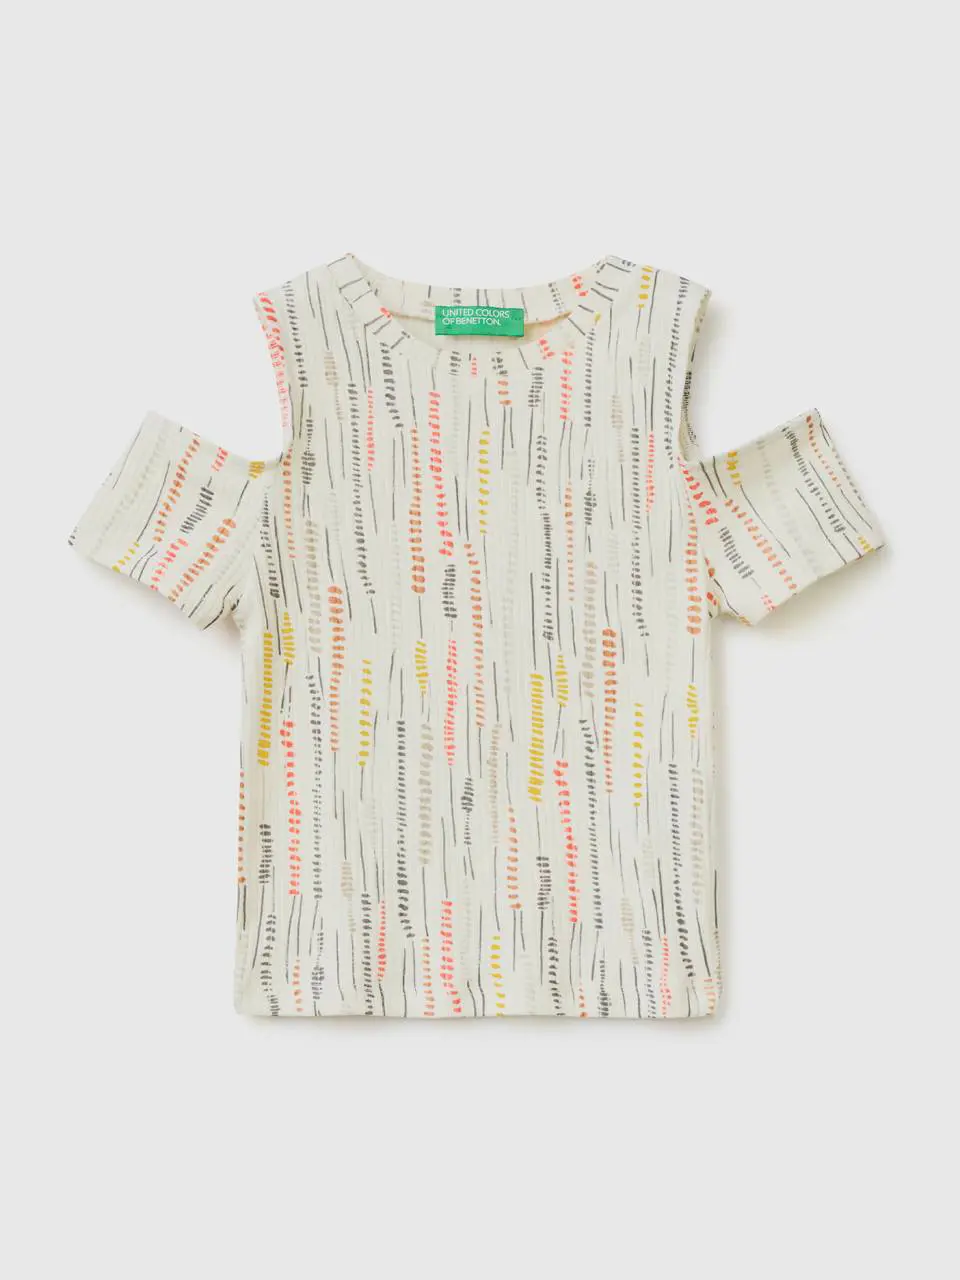 Benetton t-shirt with exposed shoulders. 1